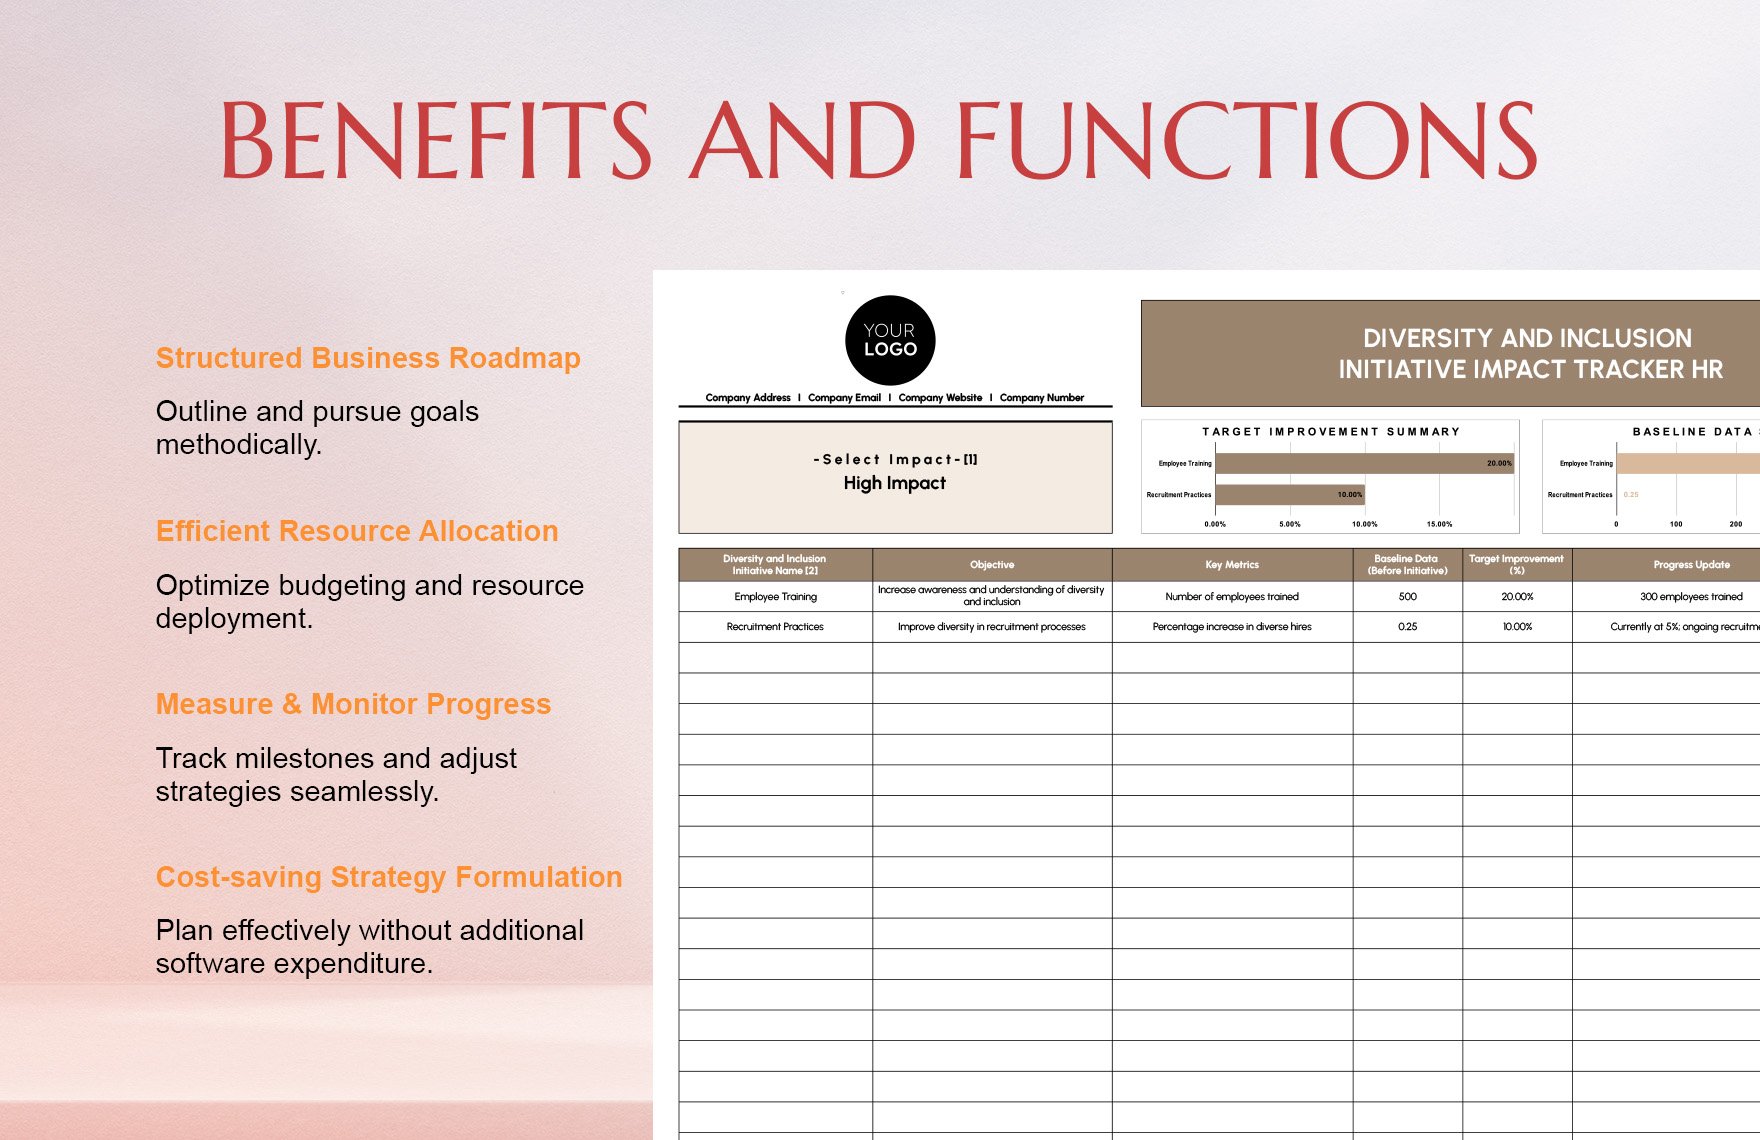 Diversity and Inclusion Initiative Impact Tracker HR Template